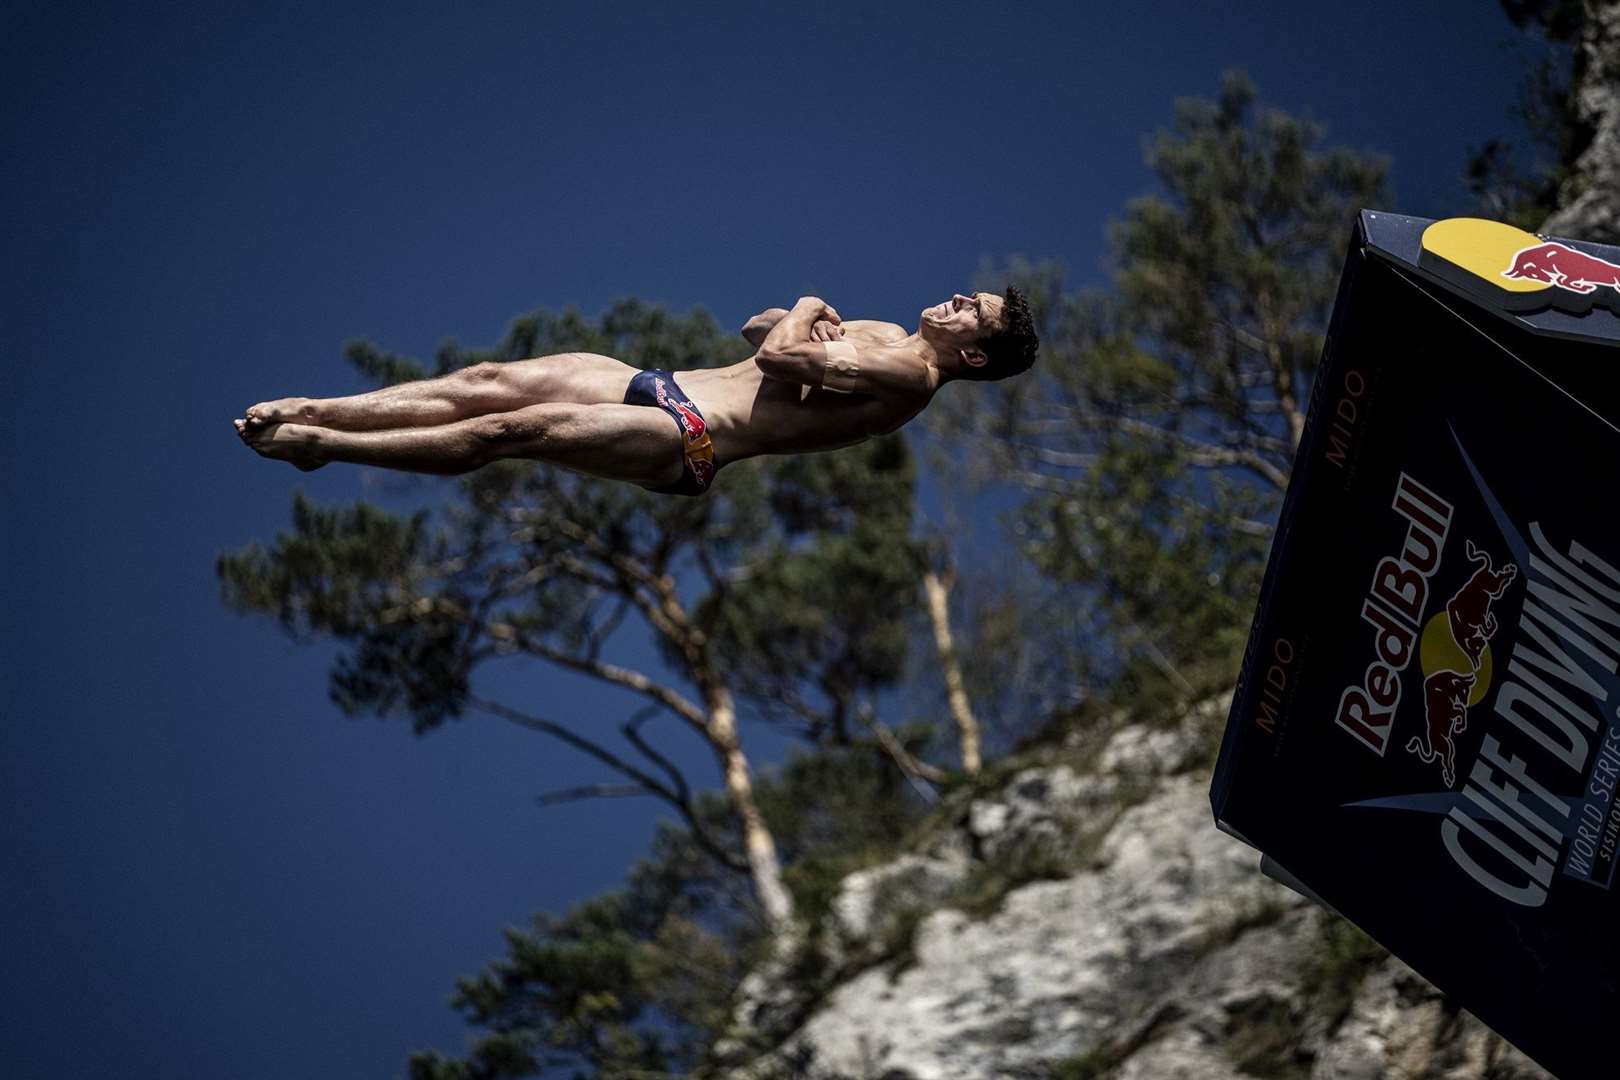 Aidan Heslop dives from the 27-metre platform during the Red Bull Cliff Diving World Series in Switzerland (Romina Amato/Red Bull/PA)